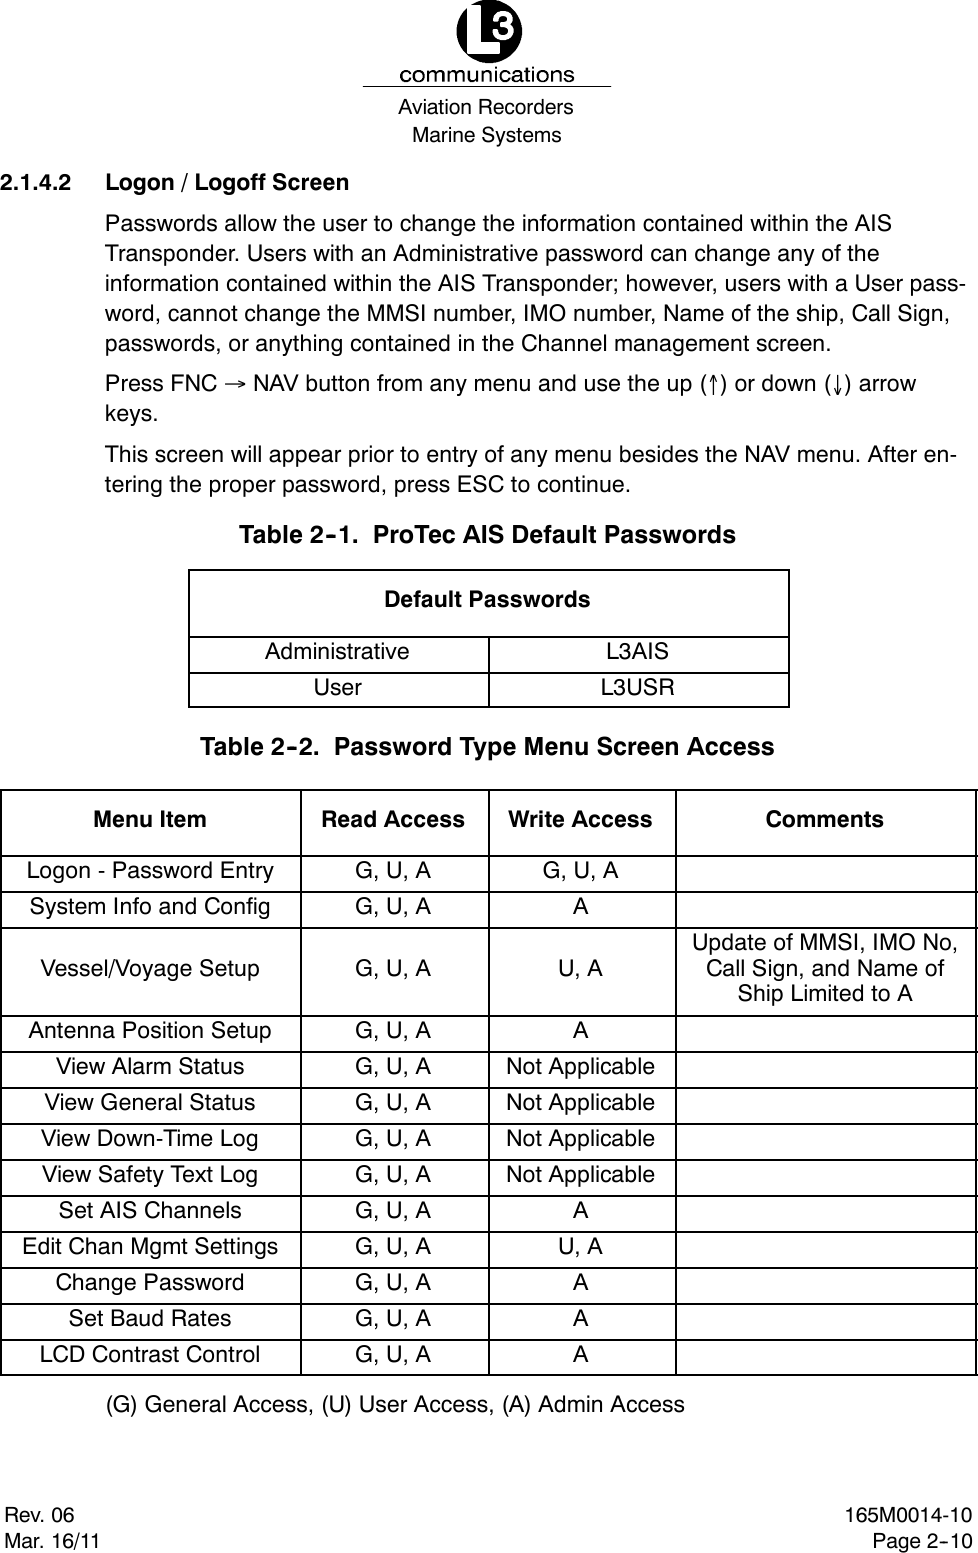 Marine SystemsAviation RecordersRev. 06Mar. 16/11165M0014-10Page 2--102.1.4.2 Logon / Logoff ScreenPasswords allow the user to change the information contained within the AISTransponder. Users with an Administrative password can change any of theinformation contained within the AIS Transponder; however, users with a User pass-word, cannot change the MMSI number, IMO number, Name of the ship, Call Sign,passwords, or anything contained in the Channel management screen.Press FNC NAV button from any menu and use the up ()ordown() arrowkeys.This screen will appear prior to entry of any menu besides the NAV menu. After en-tering the proper password, press ESC to continue.Table 2--1. ProTec AIS Default PasswordsDefault PasswordsAdministrative L3AISUser L3USRTable 2--2. Password Type Menu Screen AccessMenu Item Read Access Write Access CommentsLogon - Password Entry G, U, A G, U, ASystem Info and Config G, U, A AVessel/Voyage Setup G, U, A U, AUpdate of MMSI, IMO No,Call Sign, and Name ofShipLimitedtoAAntenna Position Setup G, U, A AView Alarm Status G, U, A Not ApplicableView General Status G, U, A Not ApplicableView Down-Time Log G, U, A Not ApplicableView Safety Text Log G, U, A Not ApplicableSet AIS Channels G, U, A AEdit Chan Mgmt Settings G, U, A U, AChange Password G, U, A ASet Baud Rates G, U, A ALCD Contrast Control G, U, A A(G) General Access, (U) User Access, (A) Admin Access